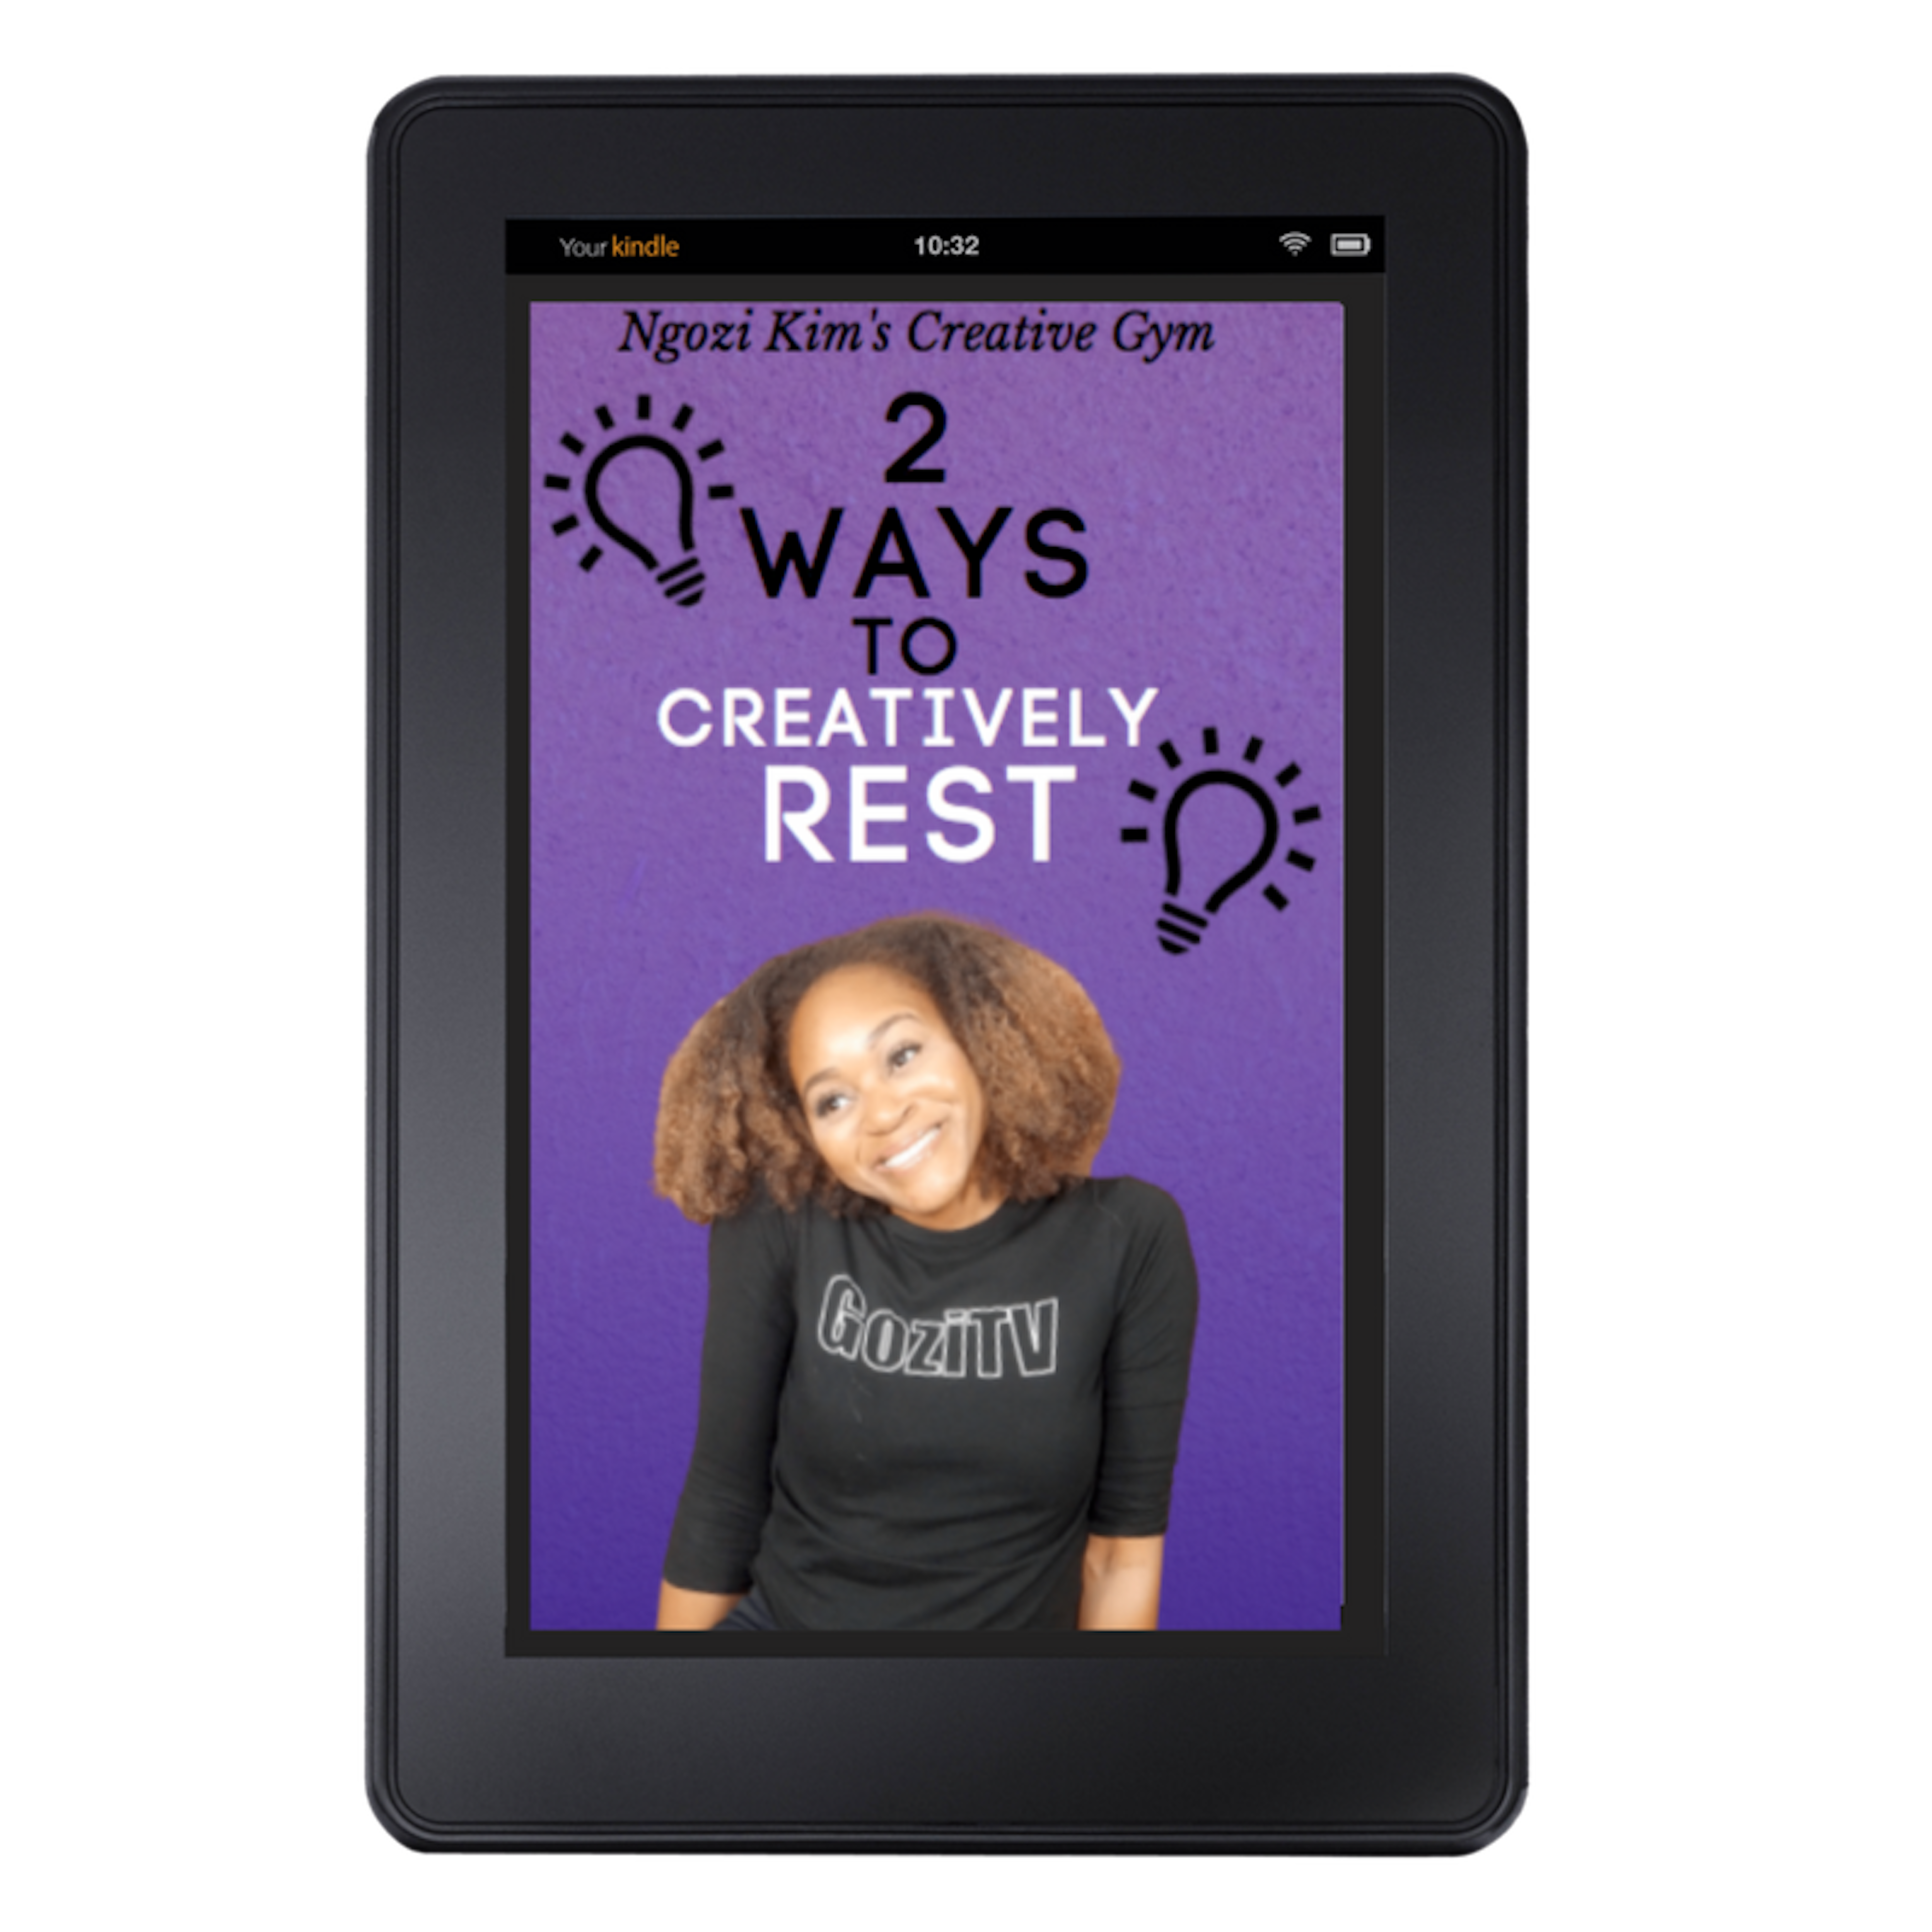 2 WAYS TO CREATIVELY REST